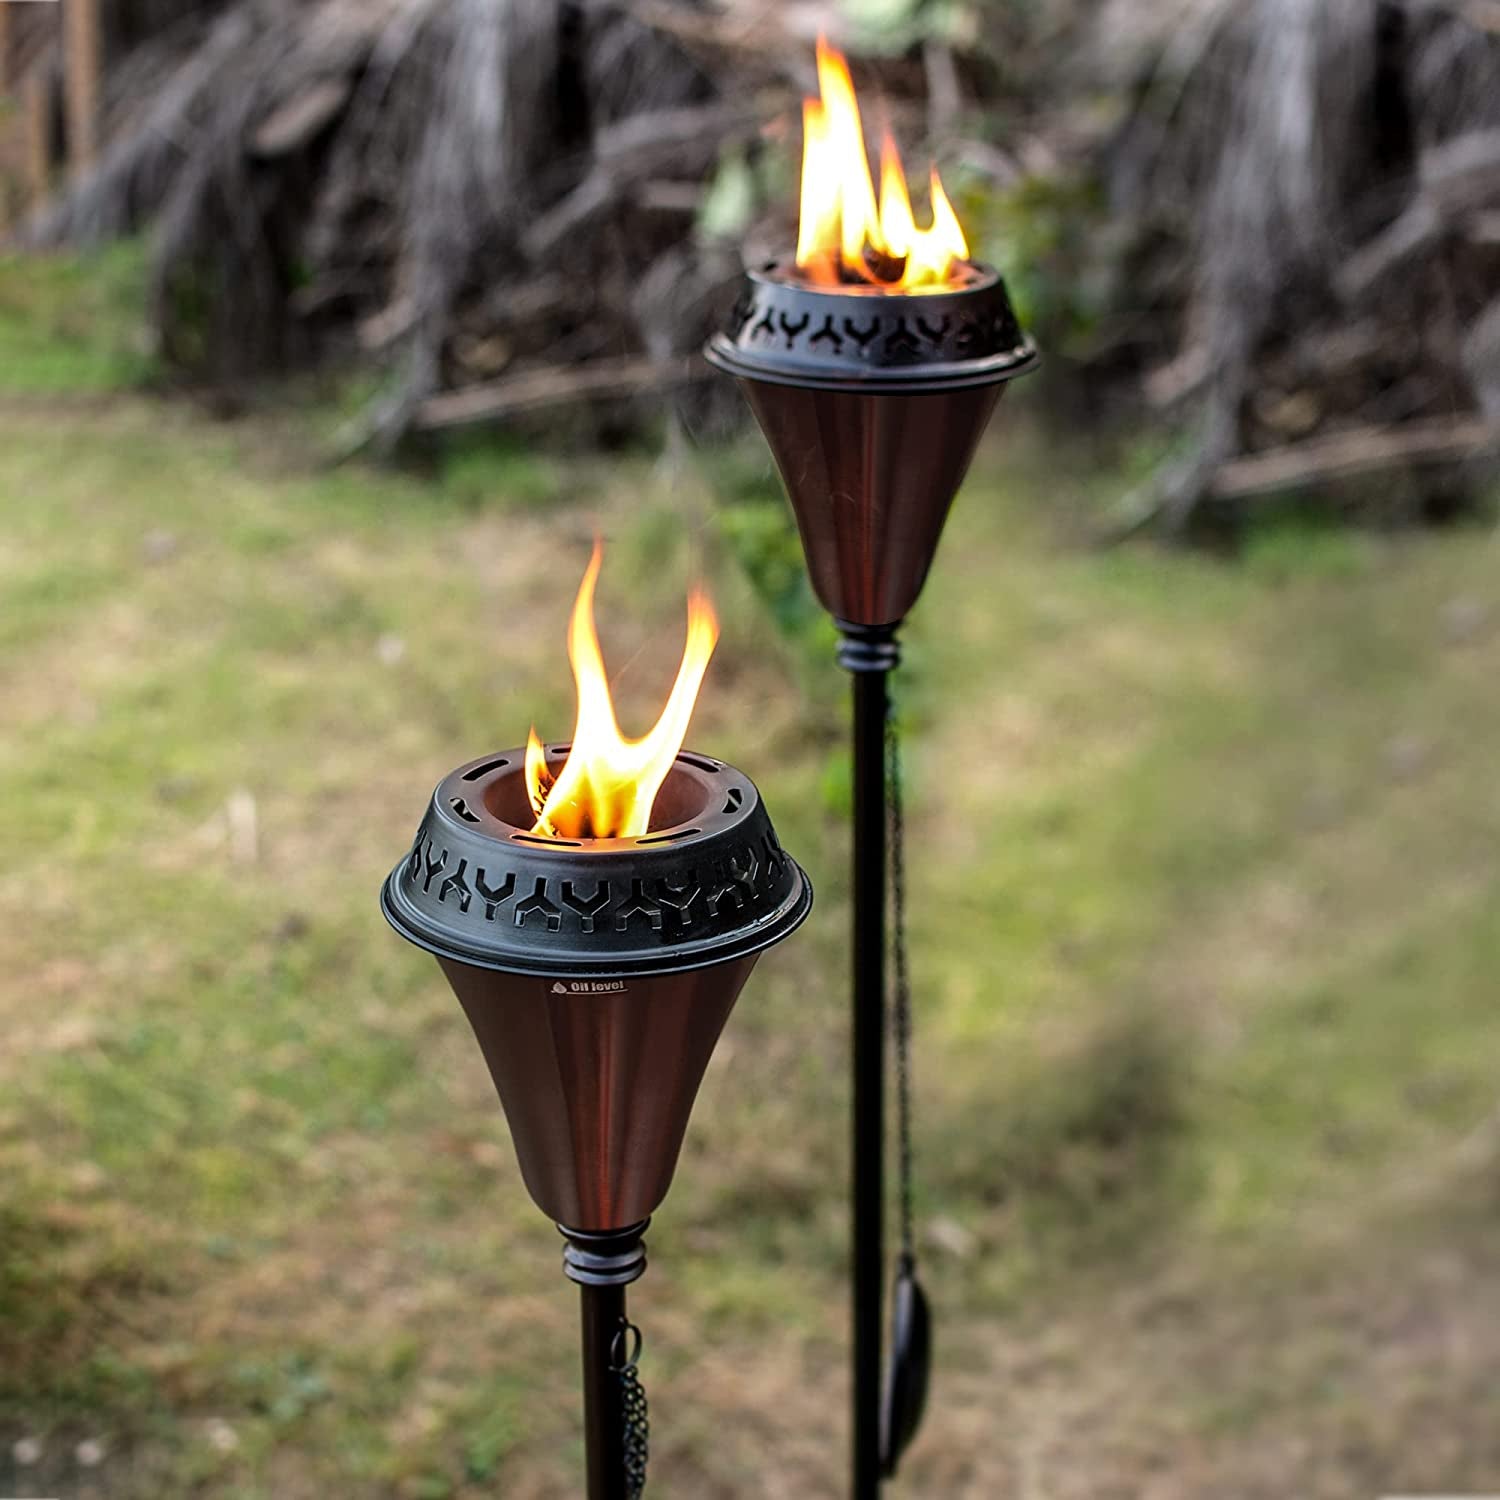 Deco Window, Large Flame Garden Torch - Deco Home Garden Torch Set of 2 | Citronella Garden Outdoor/Patio Outdoor Lighting Torch for Party Patio Pathway with Spikes and Deck Clamp | Caramel Black